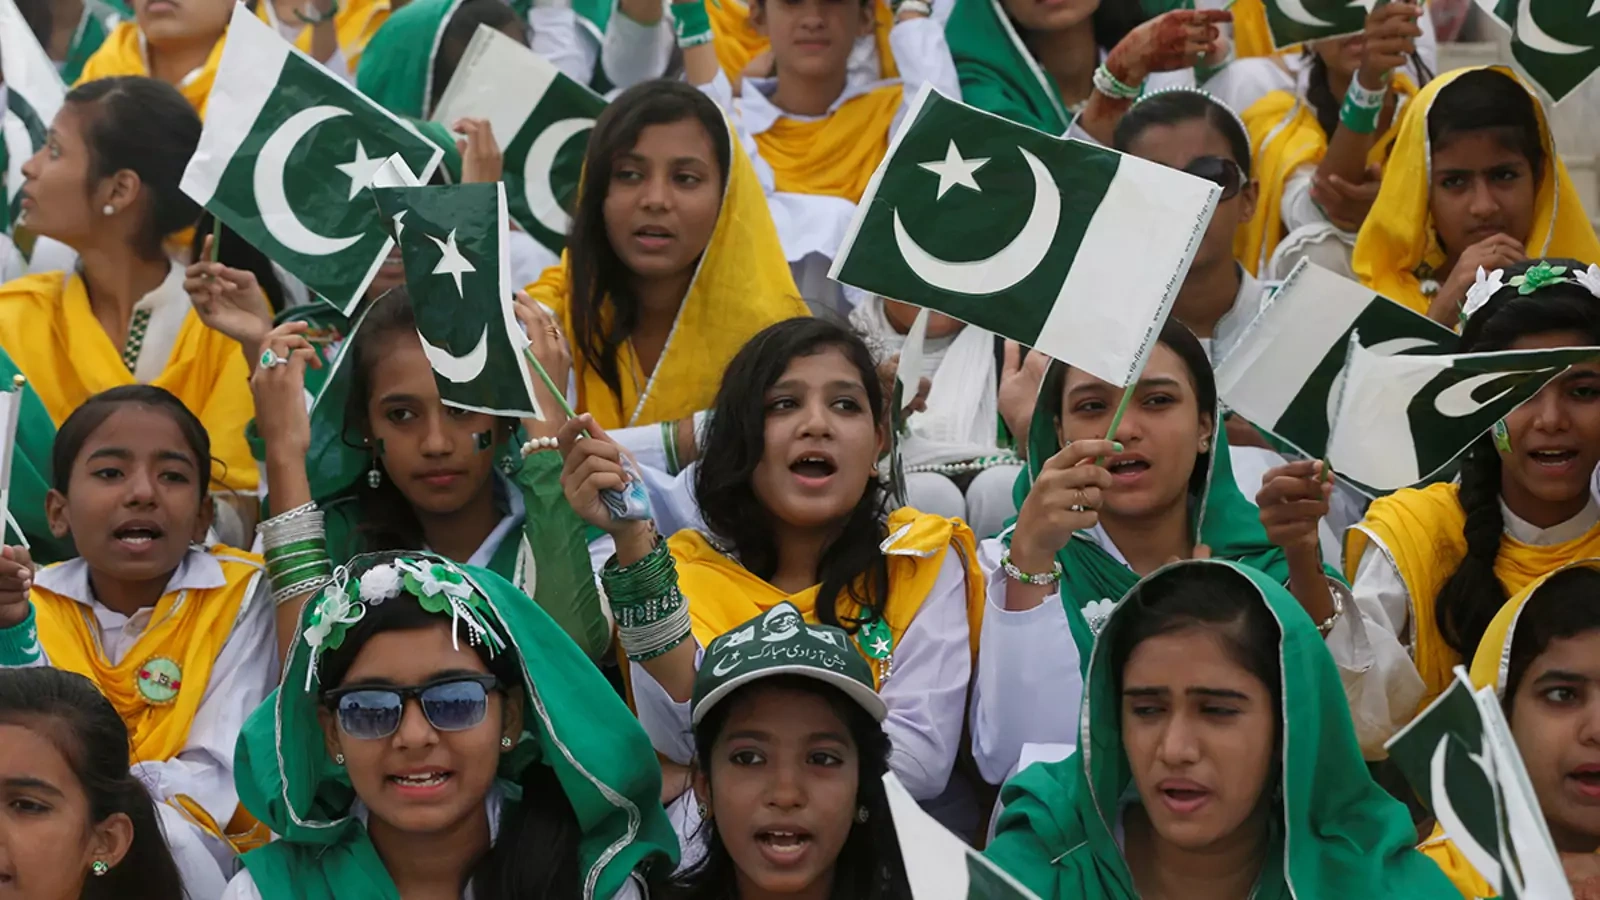 Attendees wave Pakistan’s national flag at a ceremony to celebrate the country's seventieth independence day in Karachi.